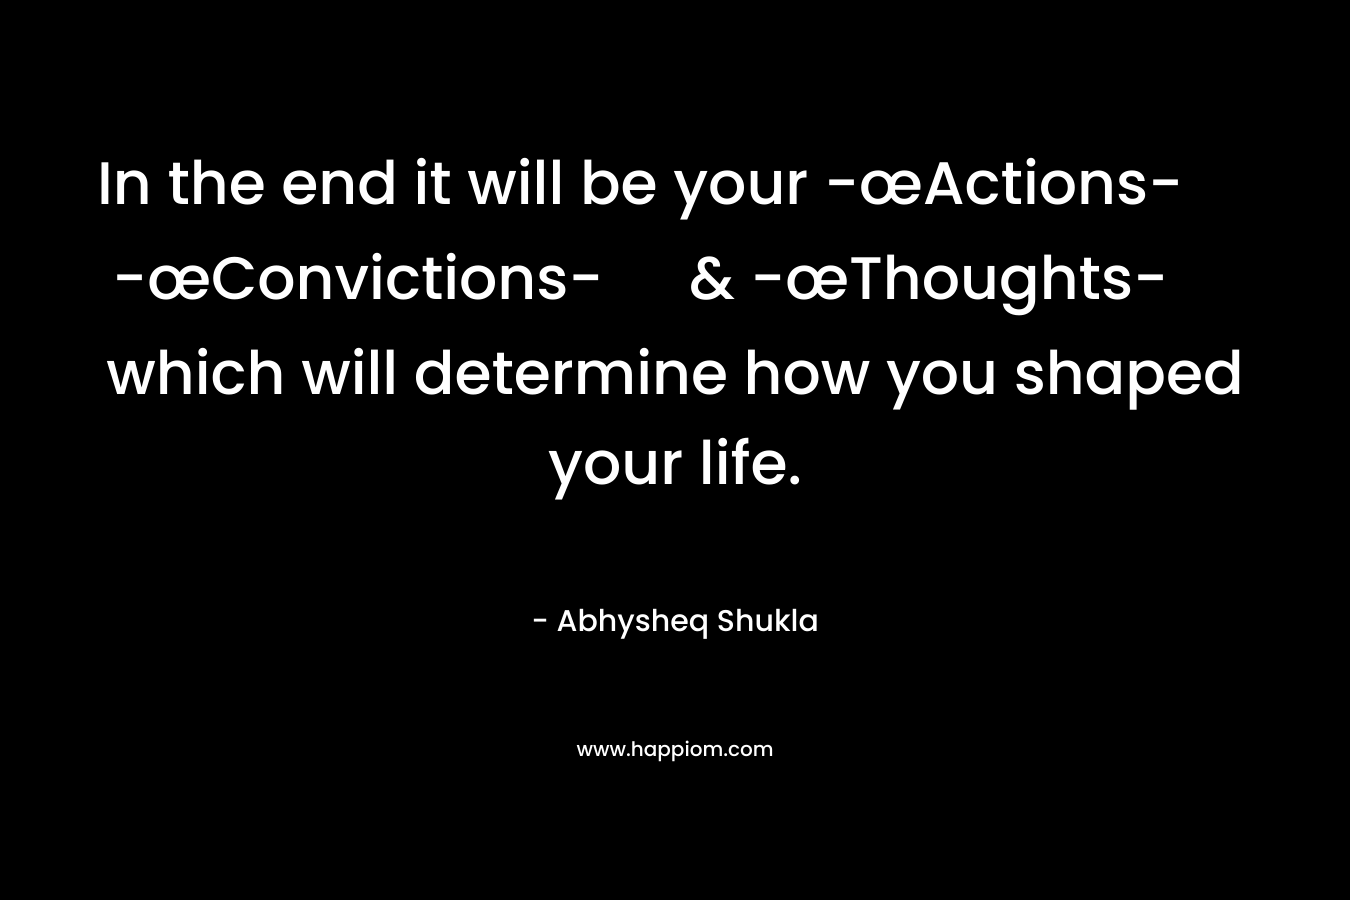 In the end it will be your -œActions- -œConvictions- & -œThoughts- which will determine how you shaped your life. – Abhysheq Shukla